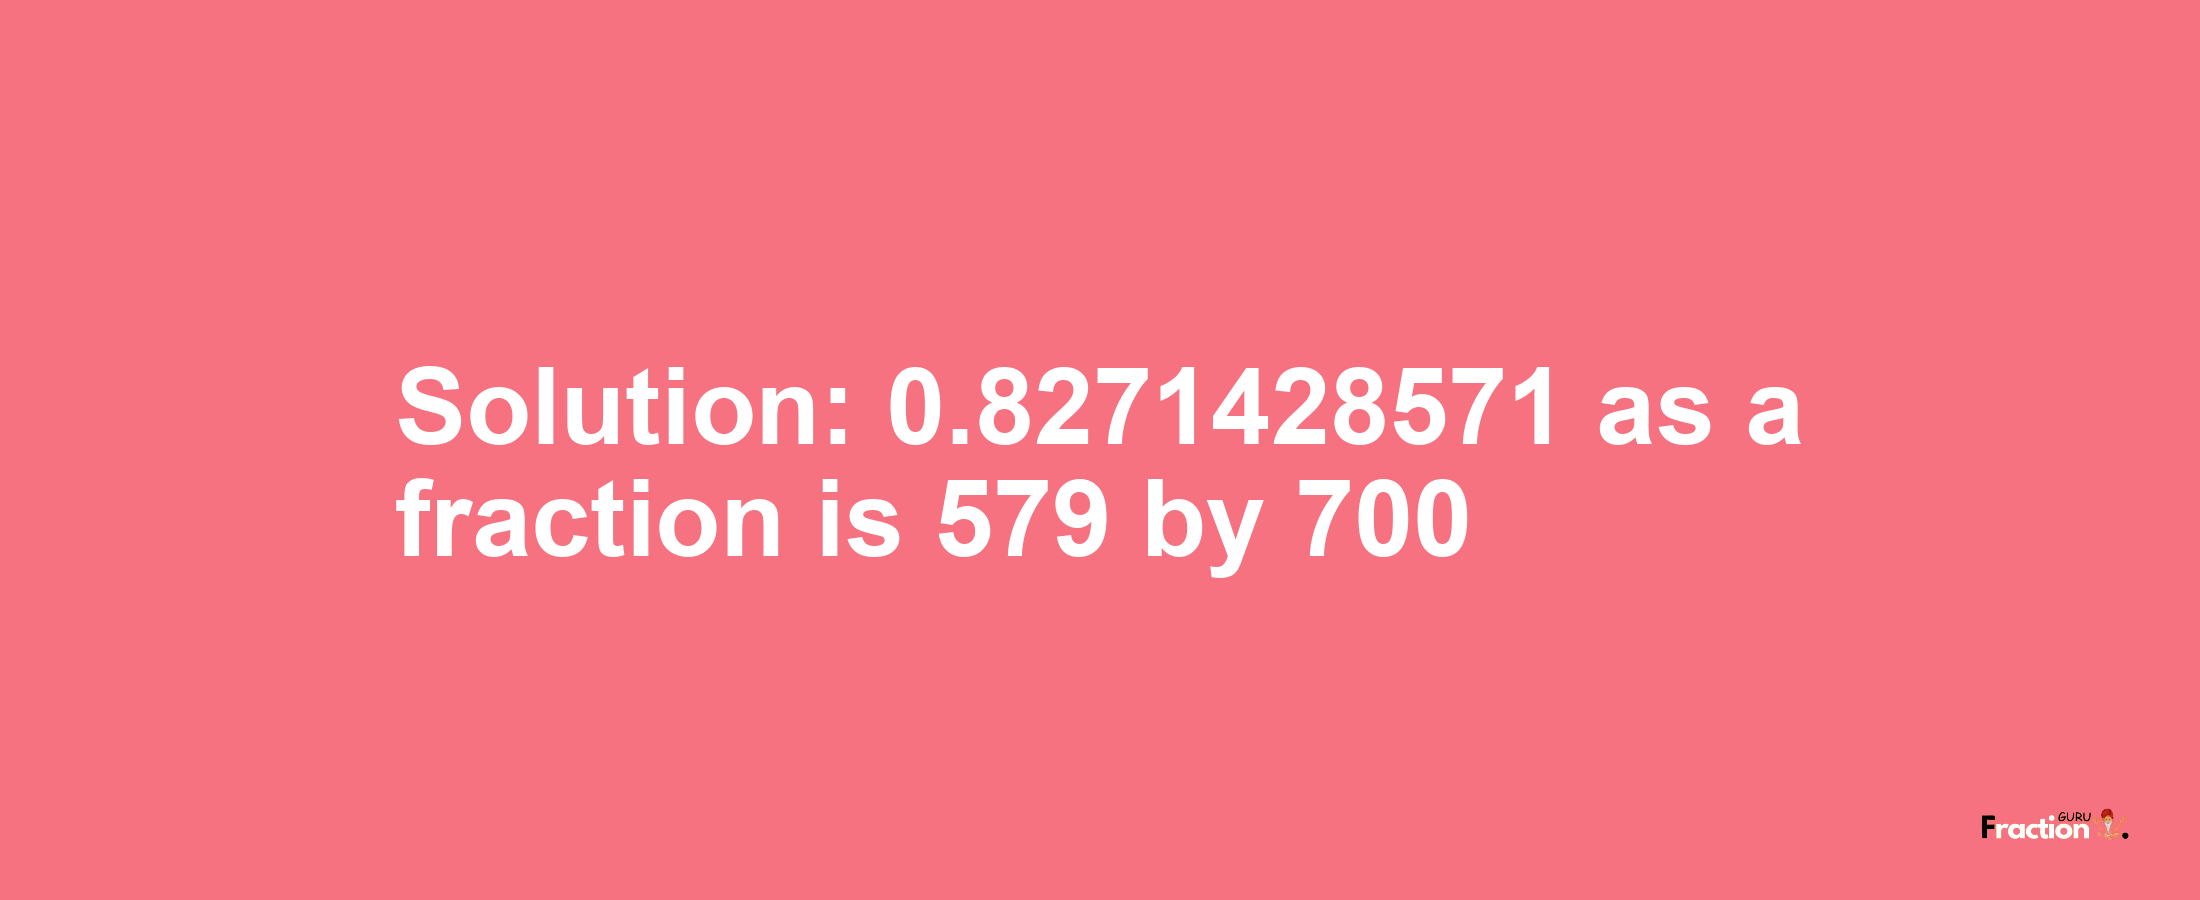 Solution:0.8271428571 as a fraction is 579/700